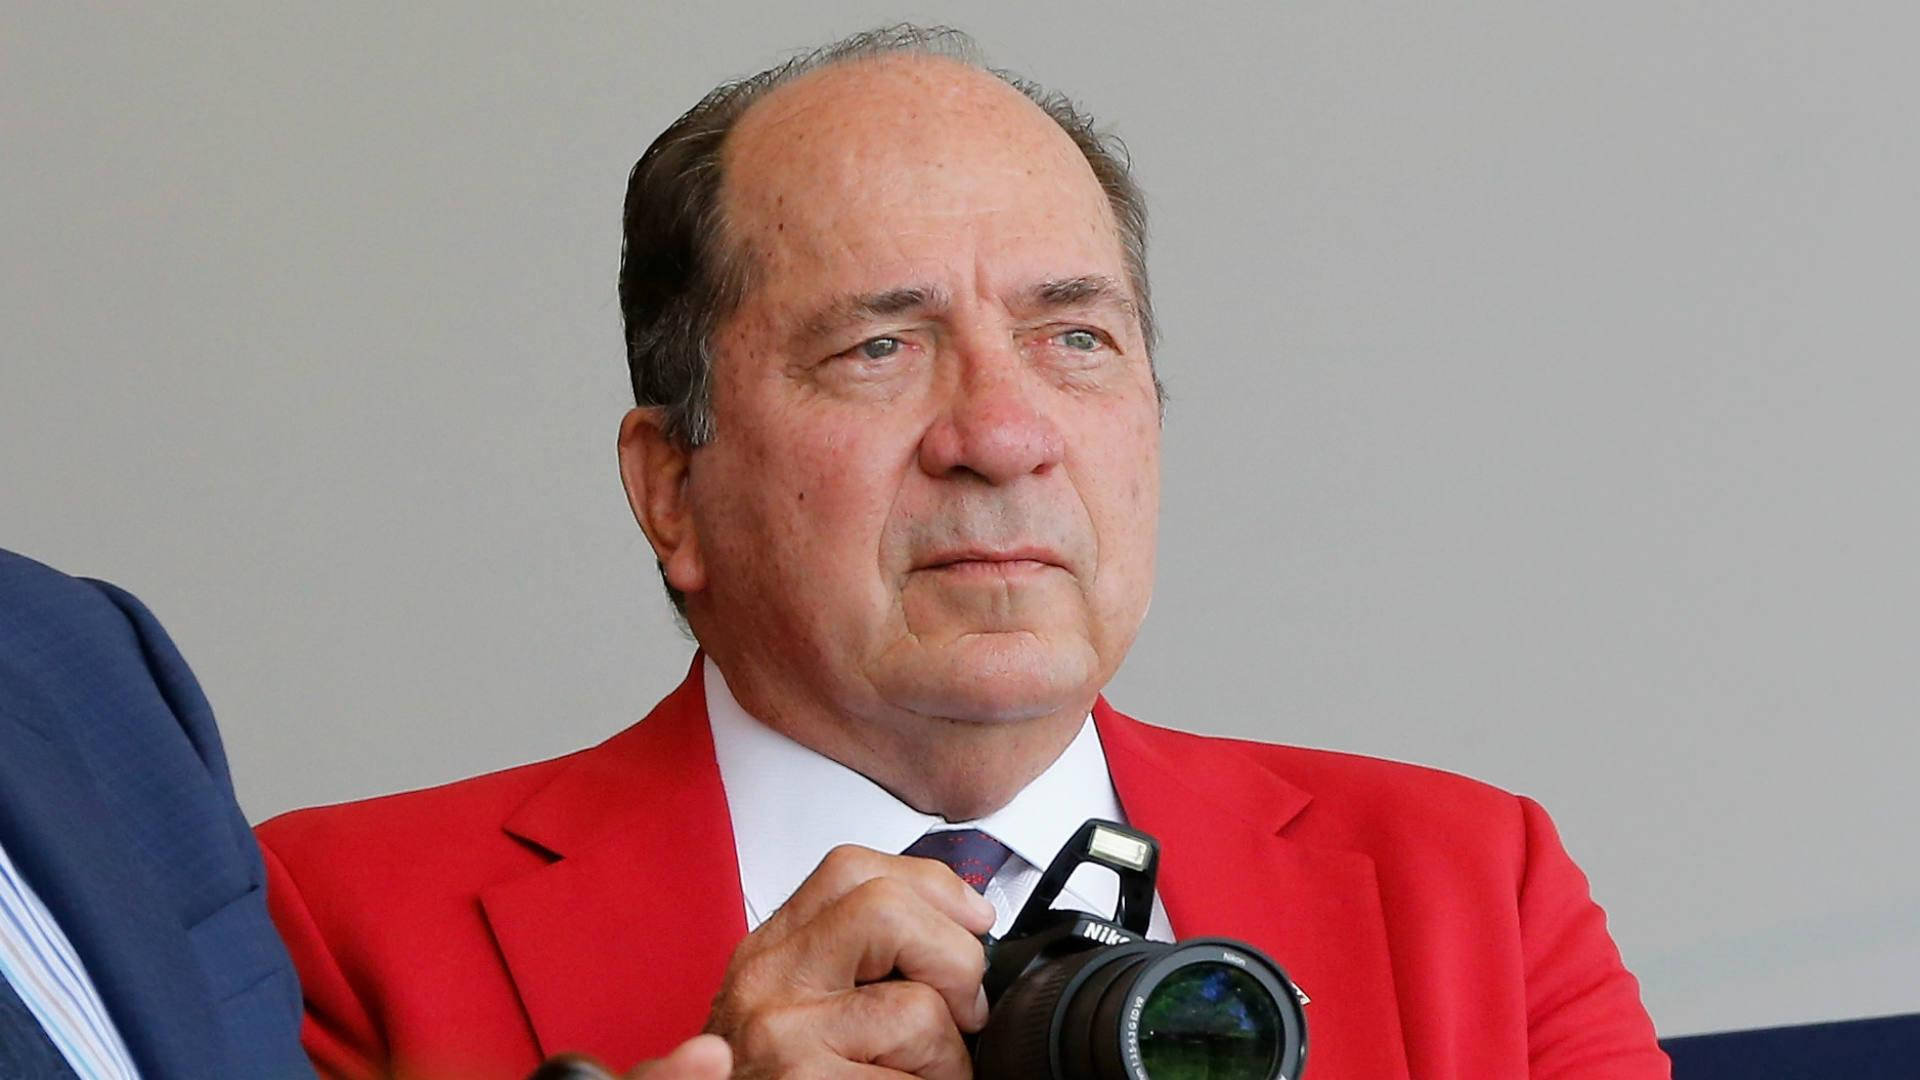 Johnny Bench With Camera Wallpaper